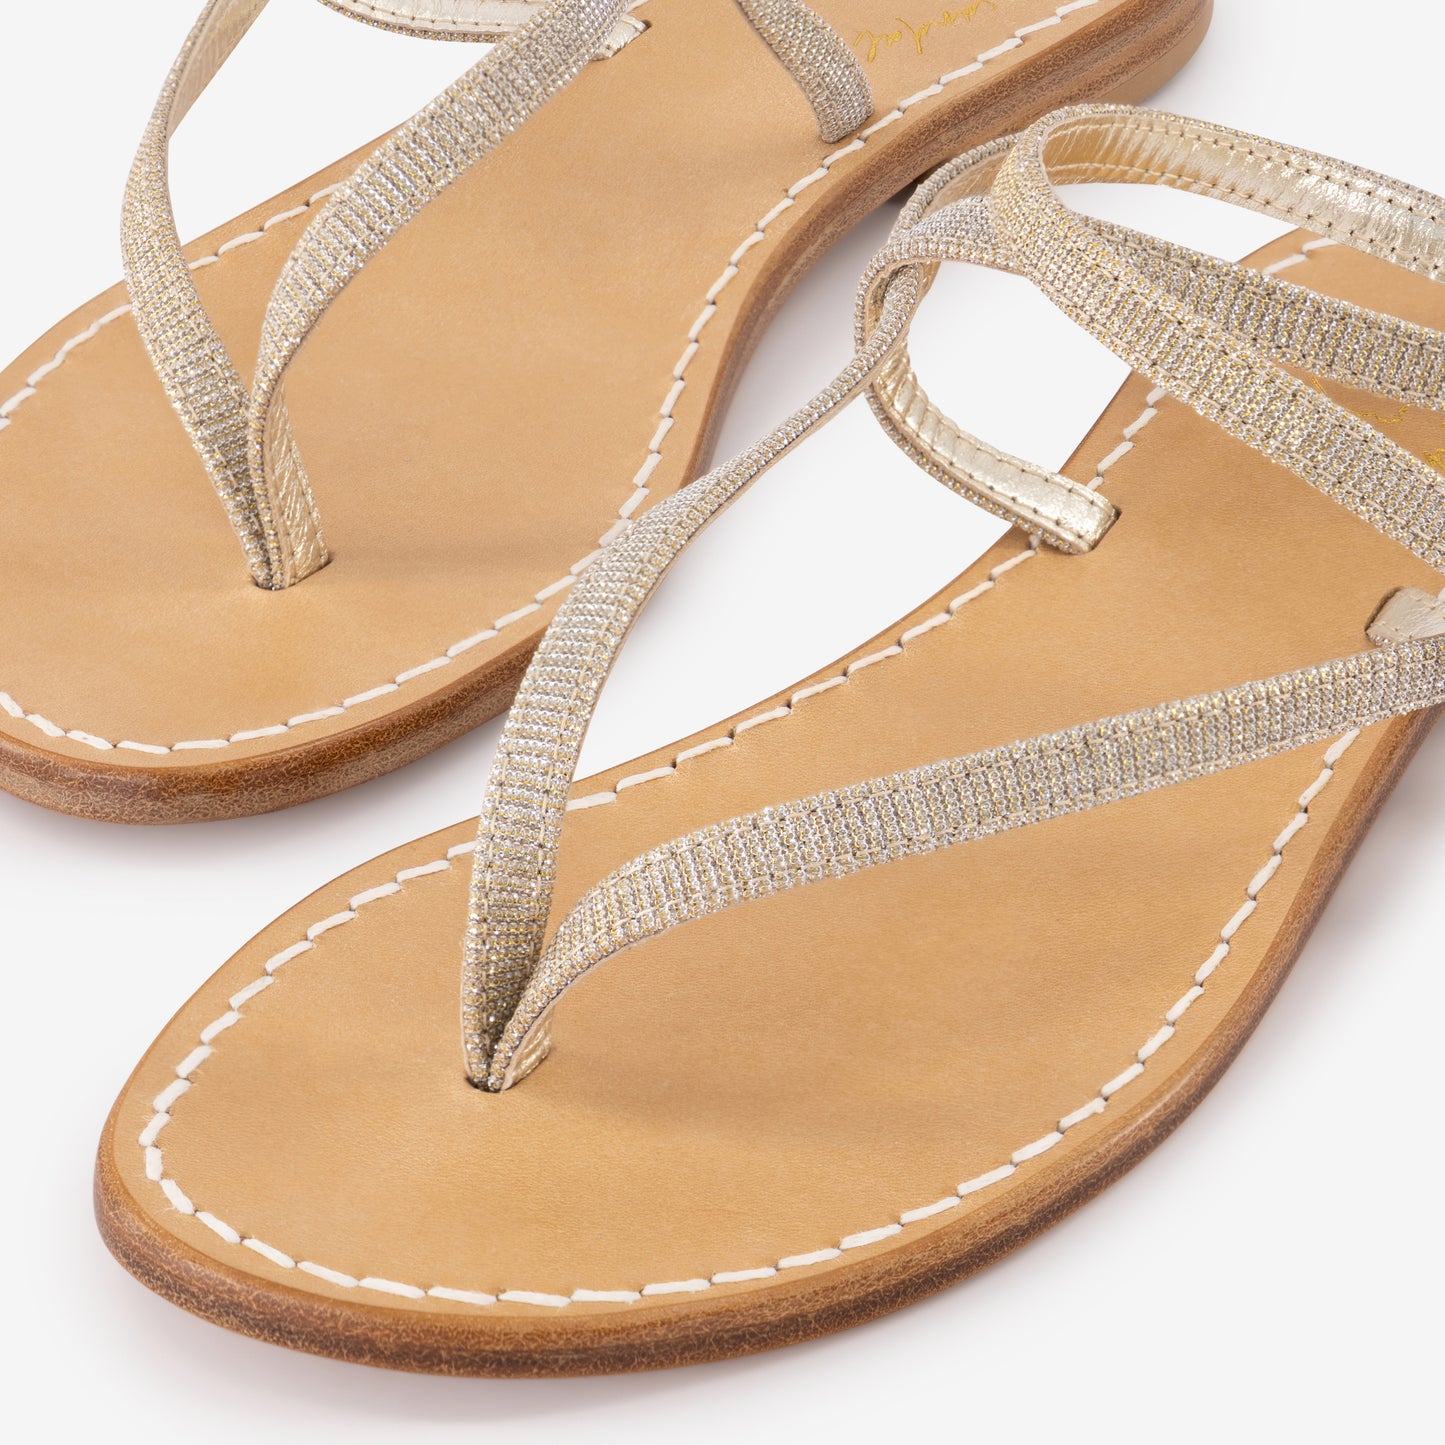 Amalafi Sandal "Dolce" | Color Gold | Italian Leather Sandal | Handmade in Italy | The breathable insole, made of real leather, ensures maximum comfort for your feet, while the hand-stitched Italian leather uppers of first choice provide strength and durability. The sparkling details on the upper sole add a touch of elegance and style to the sandal